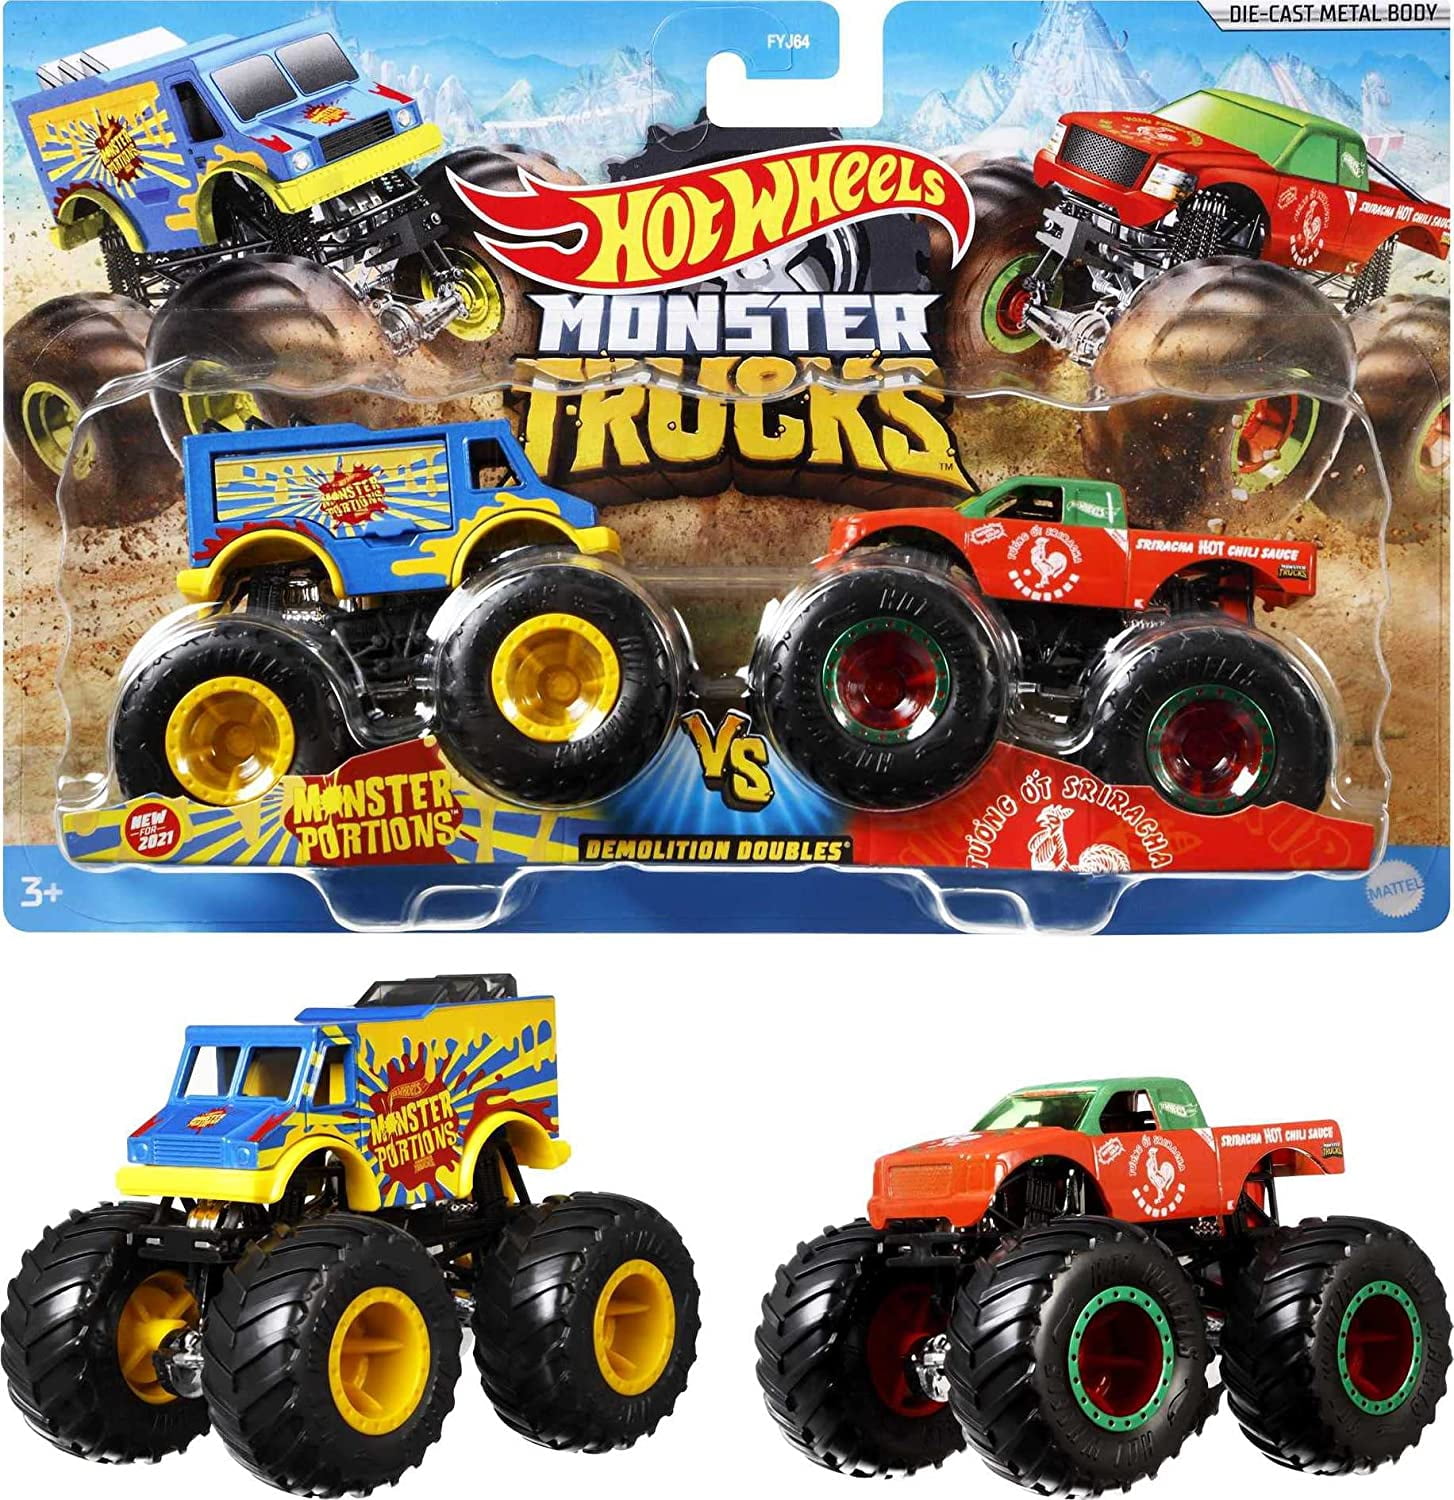 Hot Wheels Monster Trucks 1:64 Scale Die-Cast Demolition Doubles 2-Pack for  Kids age 3 - 8 Years Old, Collectible Toy Truck with BIG Wheels for  Crashing and Smashing [Styles May Vary] - Walmart.com